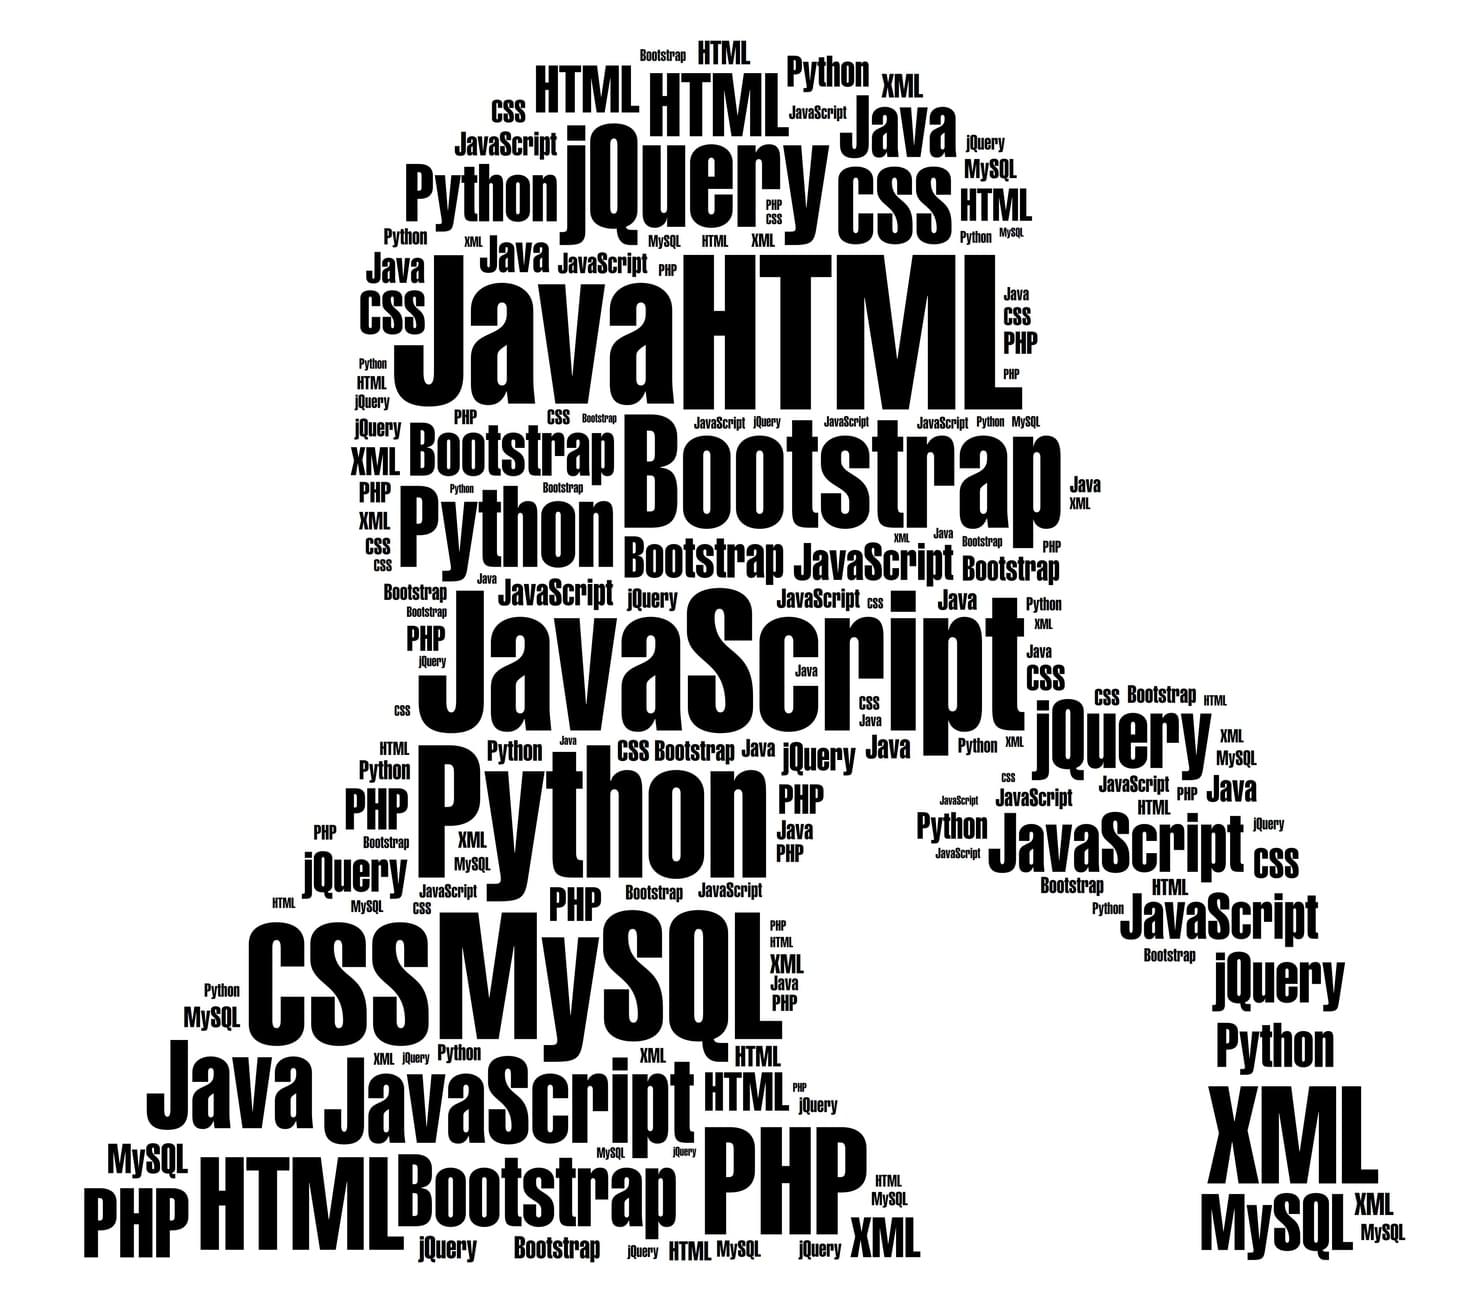 Life after JavaScript: The Benefits of Learning a 2nd Language